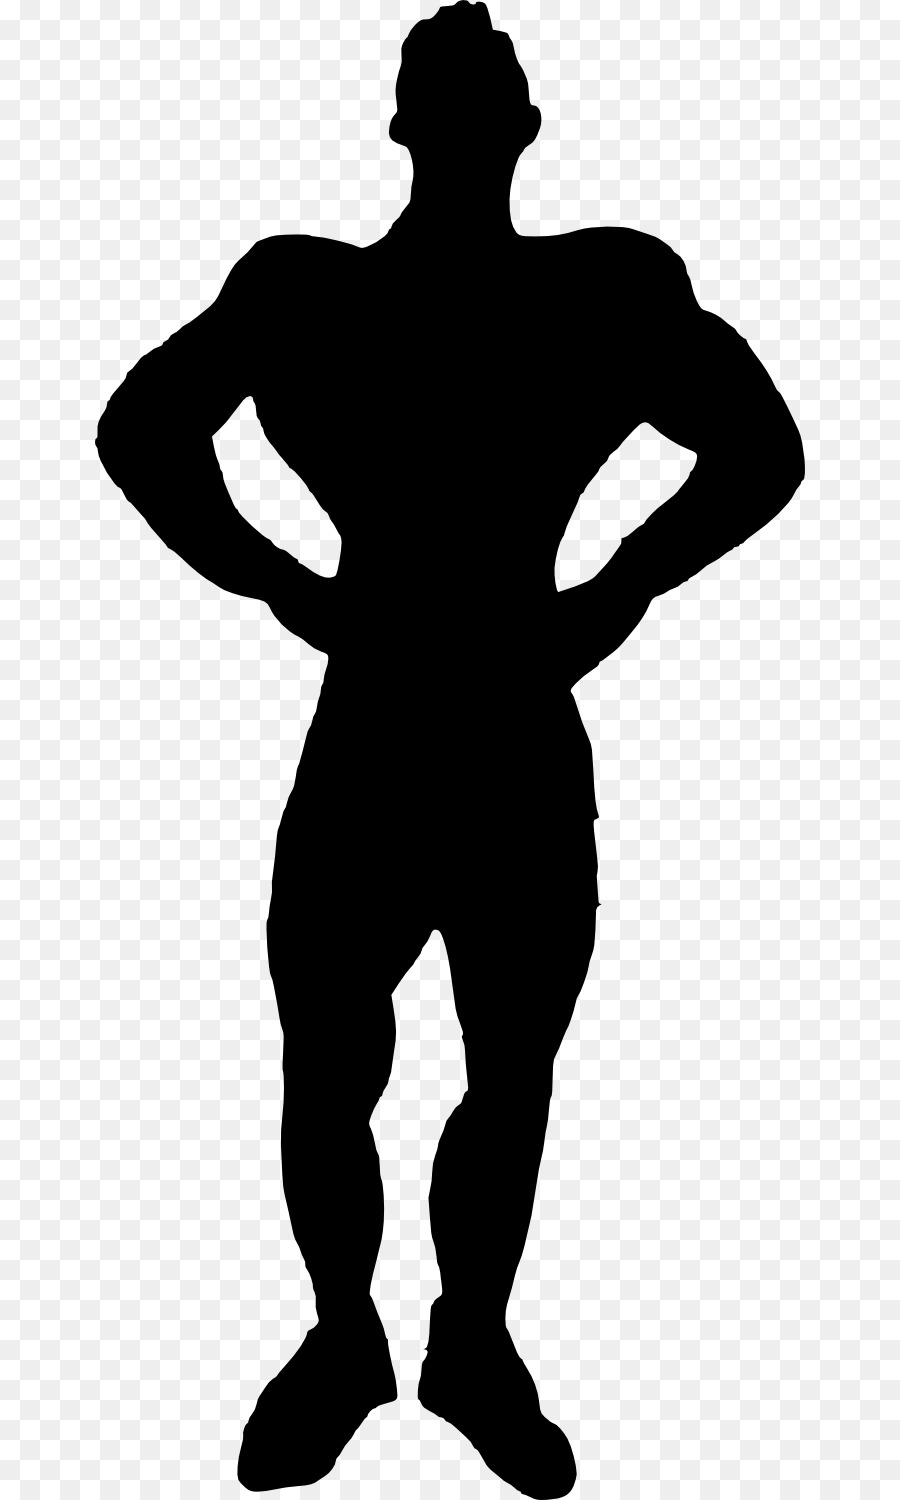 Silhouette Muscle Computer Icons Clip art - man silhouette png download - 710*1500 - Free Transparent Silhouette png Download.